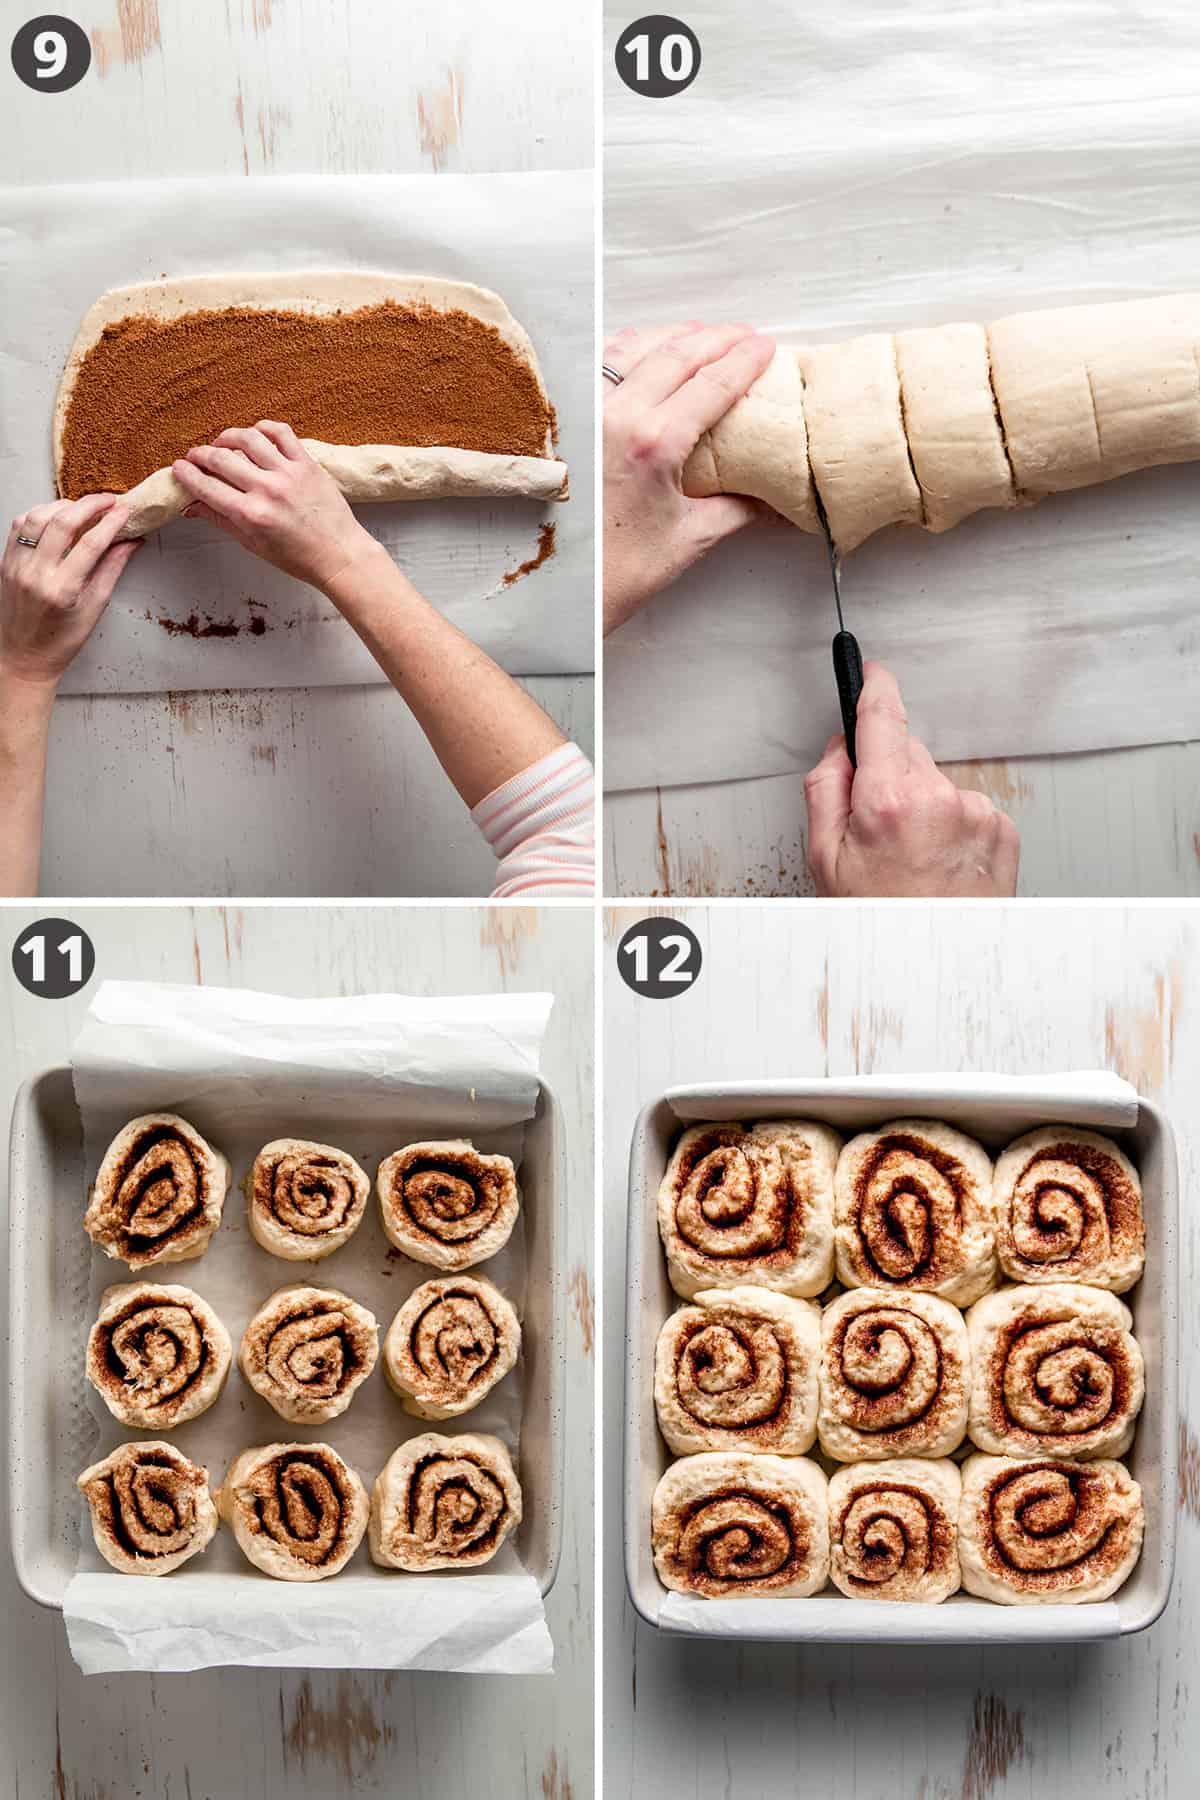 Image collage: Rolling up the dough into a log, cutting the dough into one and a half inch slices, lining the rolls in a square pan, the rolls puffed and risen with sides touching.